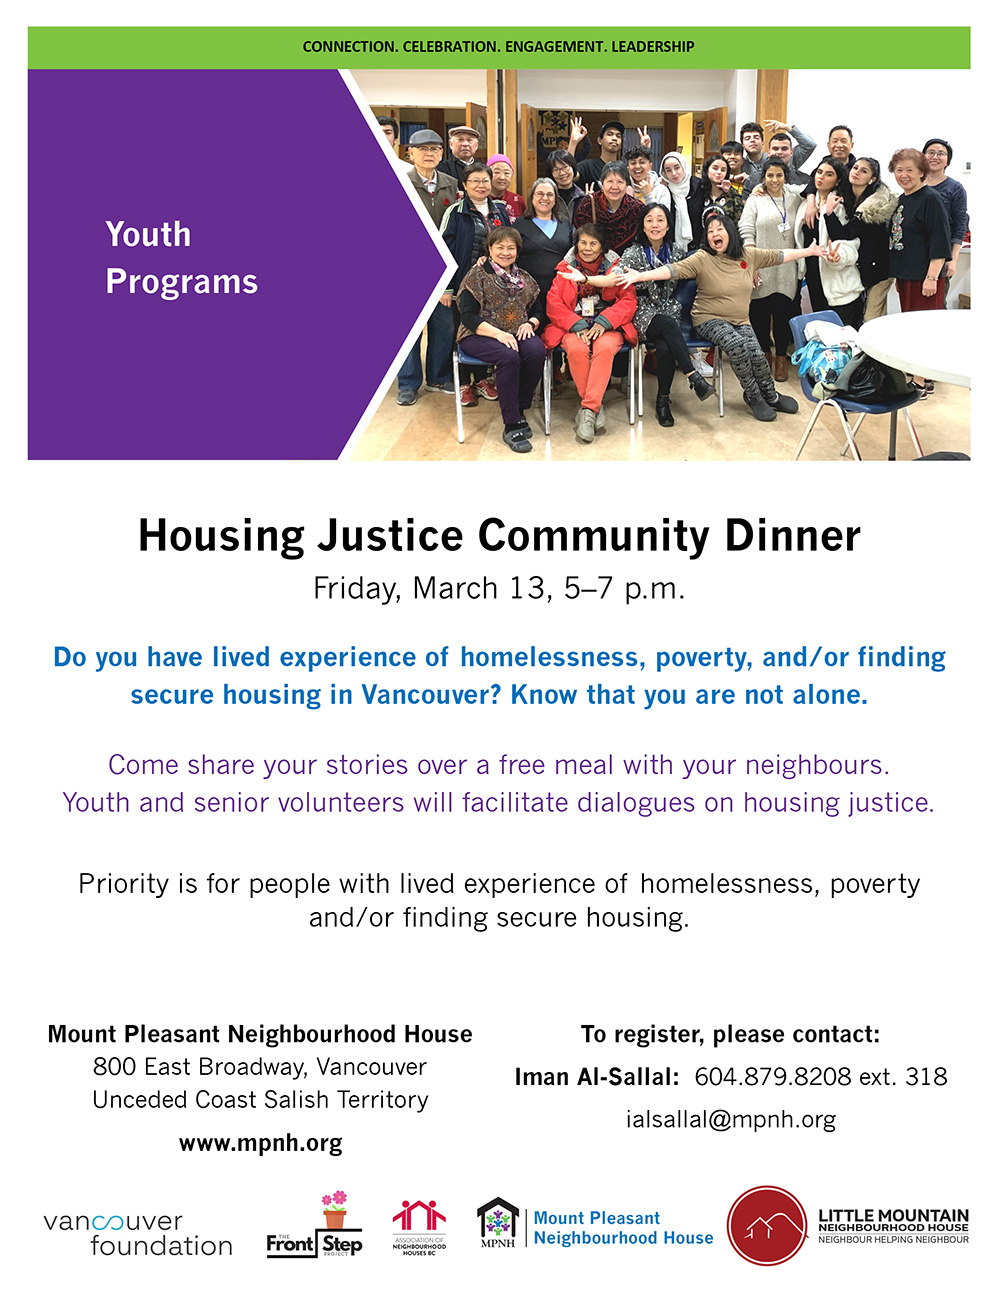 Poster for the Housing Justice Community Dinner showing a large group of people enjoying each other's company